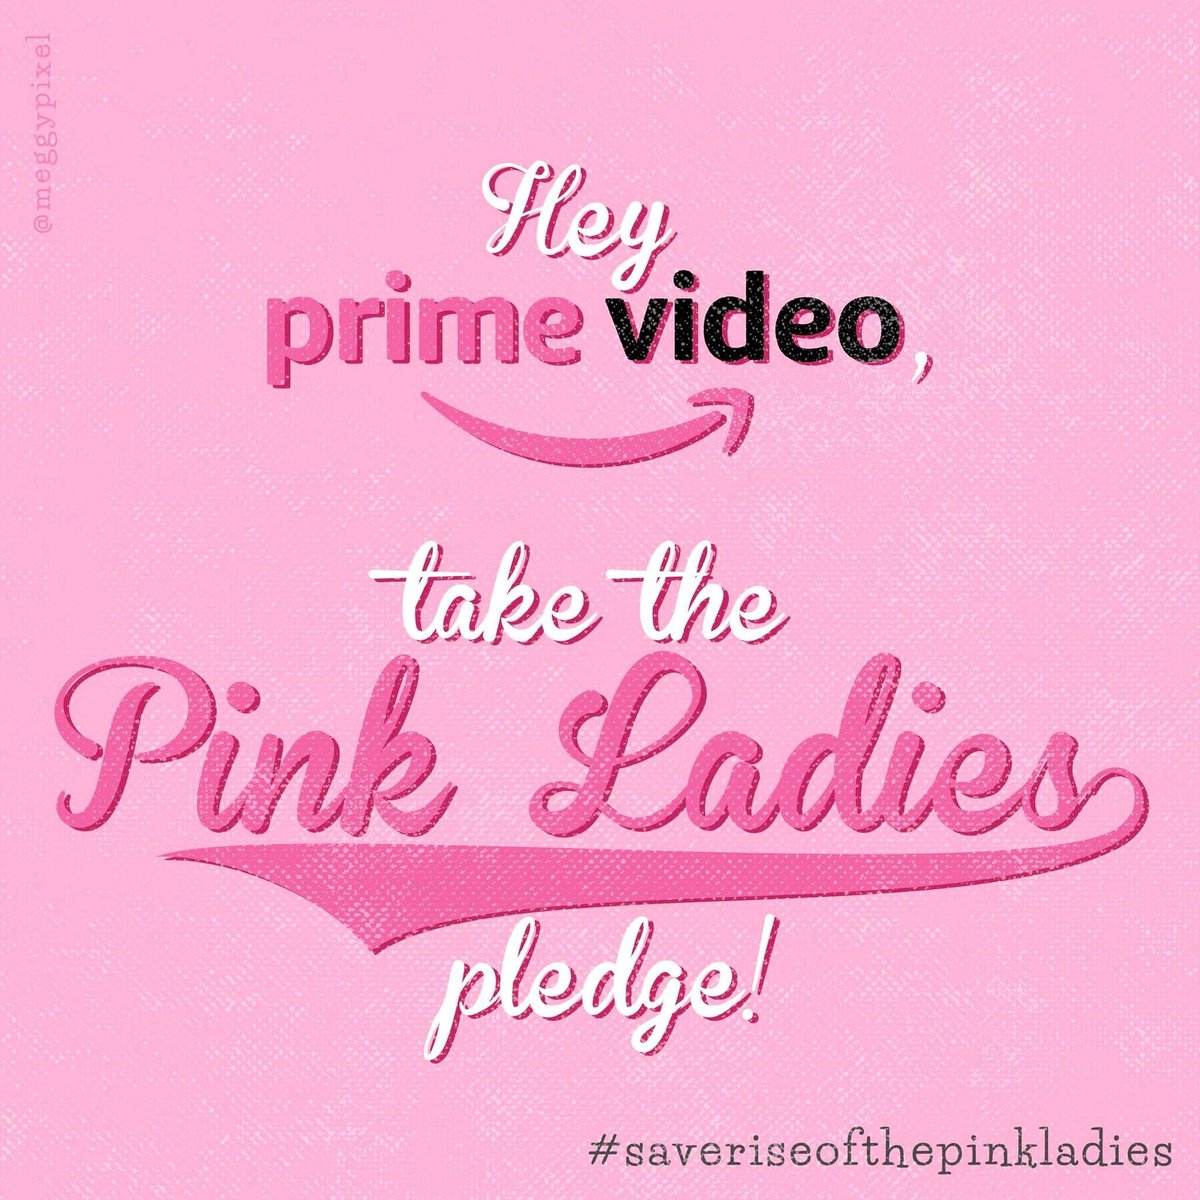 Fyi the #pinkladies pledge is to act cool, look cool, and to be cool - so BE COOL @PrimeVideo and #SaveRiseOfThePinkLadies #thinkpink #becool